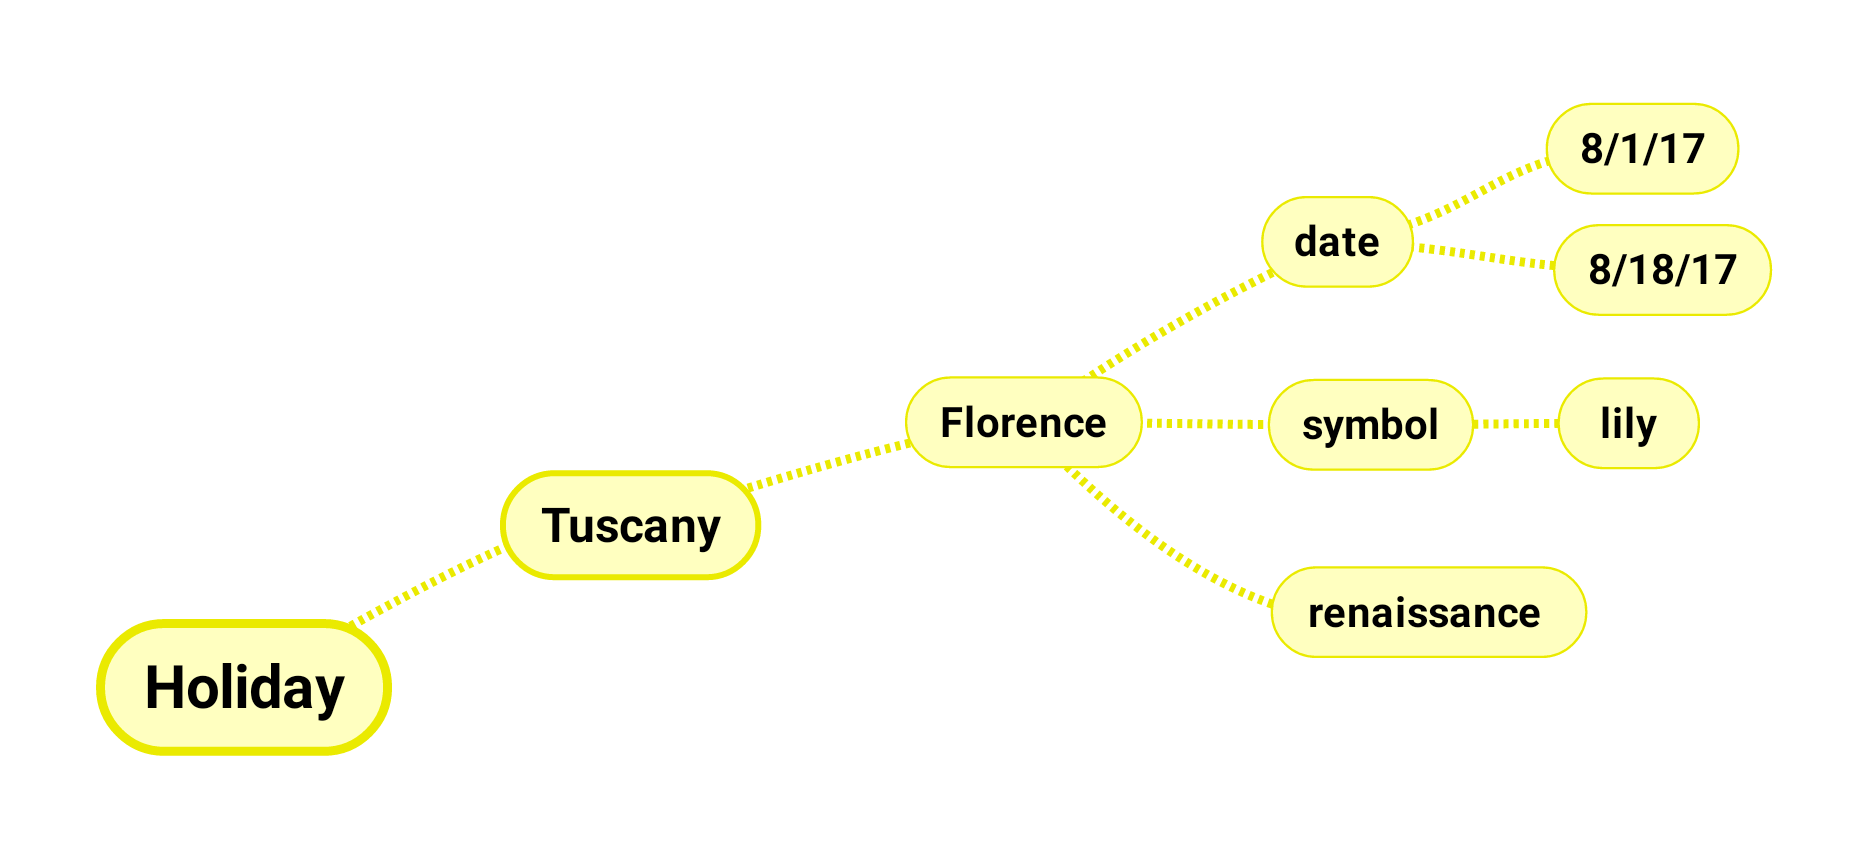 Associations are added to Florence; the symbol lily and Renaissance